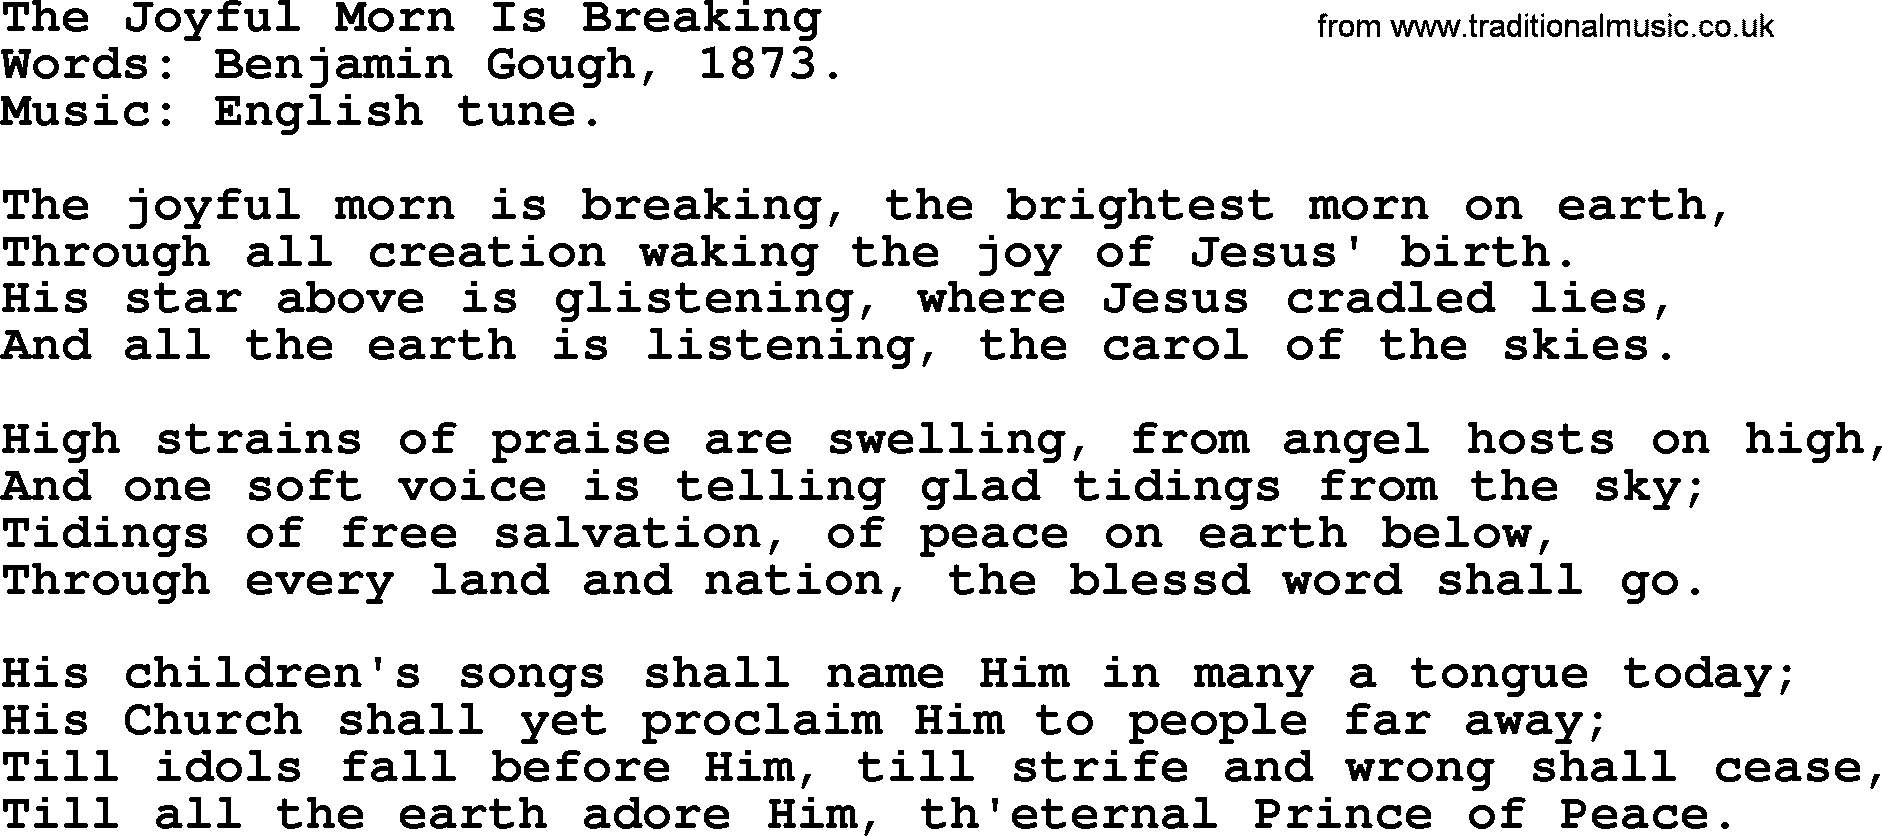 Christmas Hymns, Carols and Songs, title: The Joyful Morn Is Breaking, lyrics with PDF